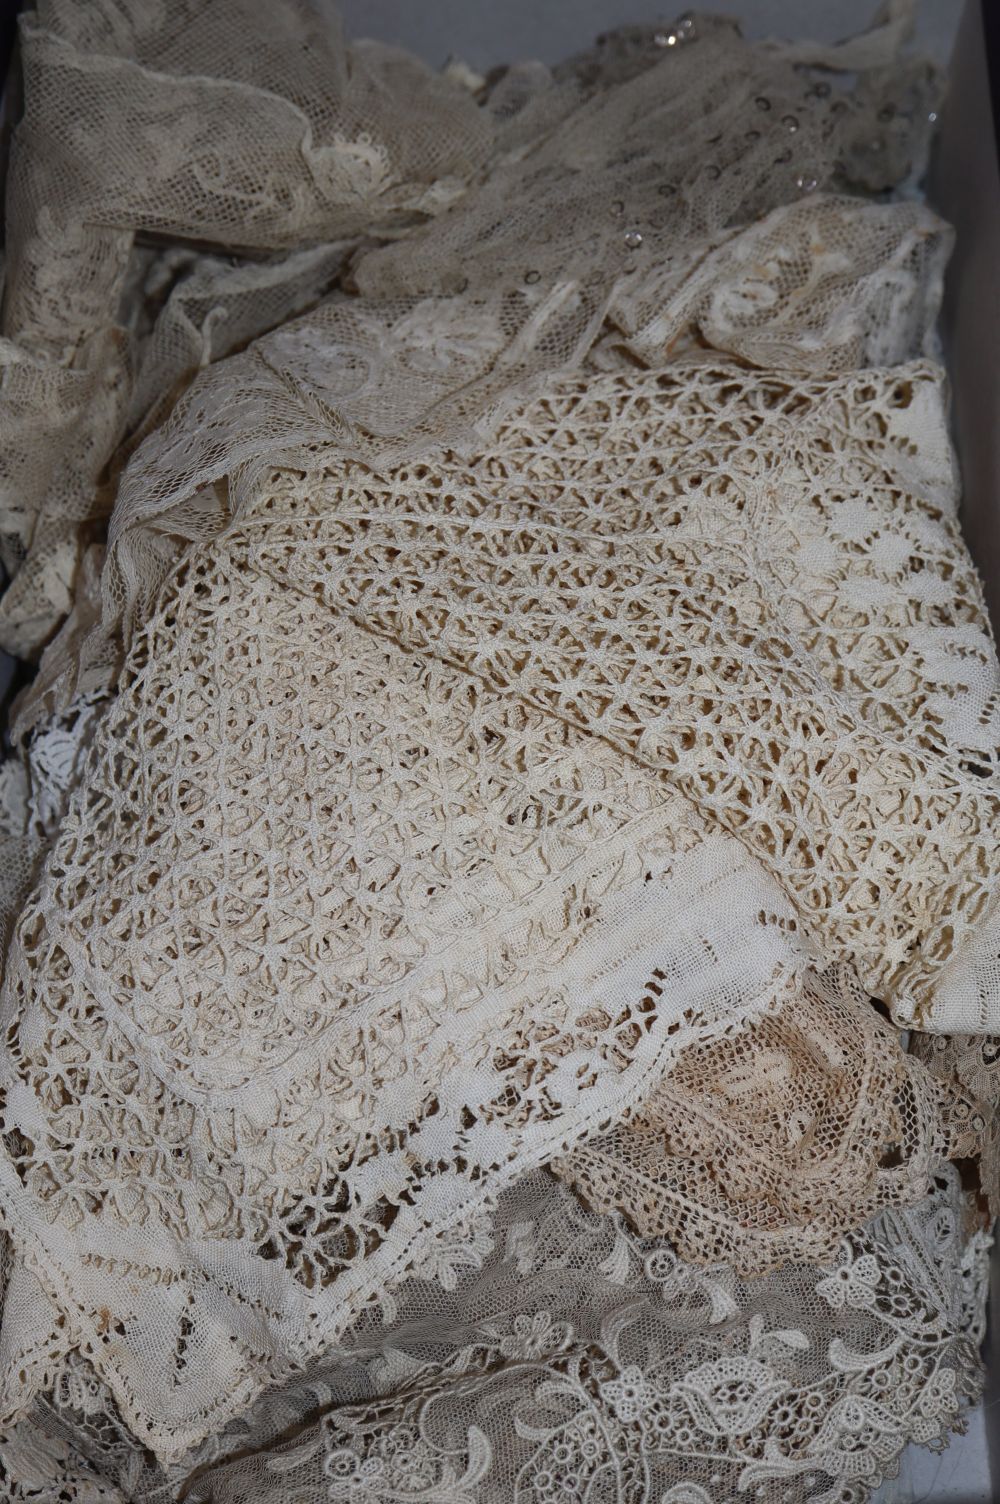 A collection of 19th century handmade needle lace, bobbin laces and Irish crochet